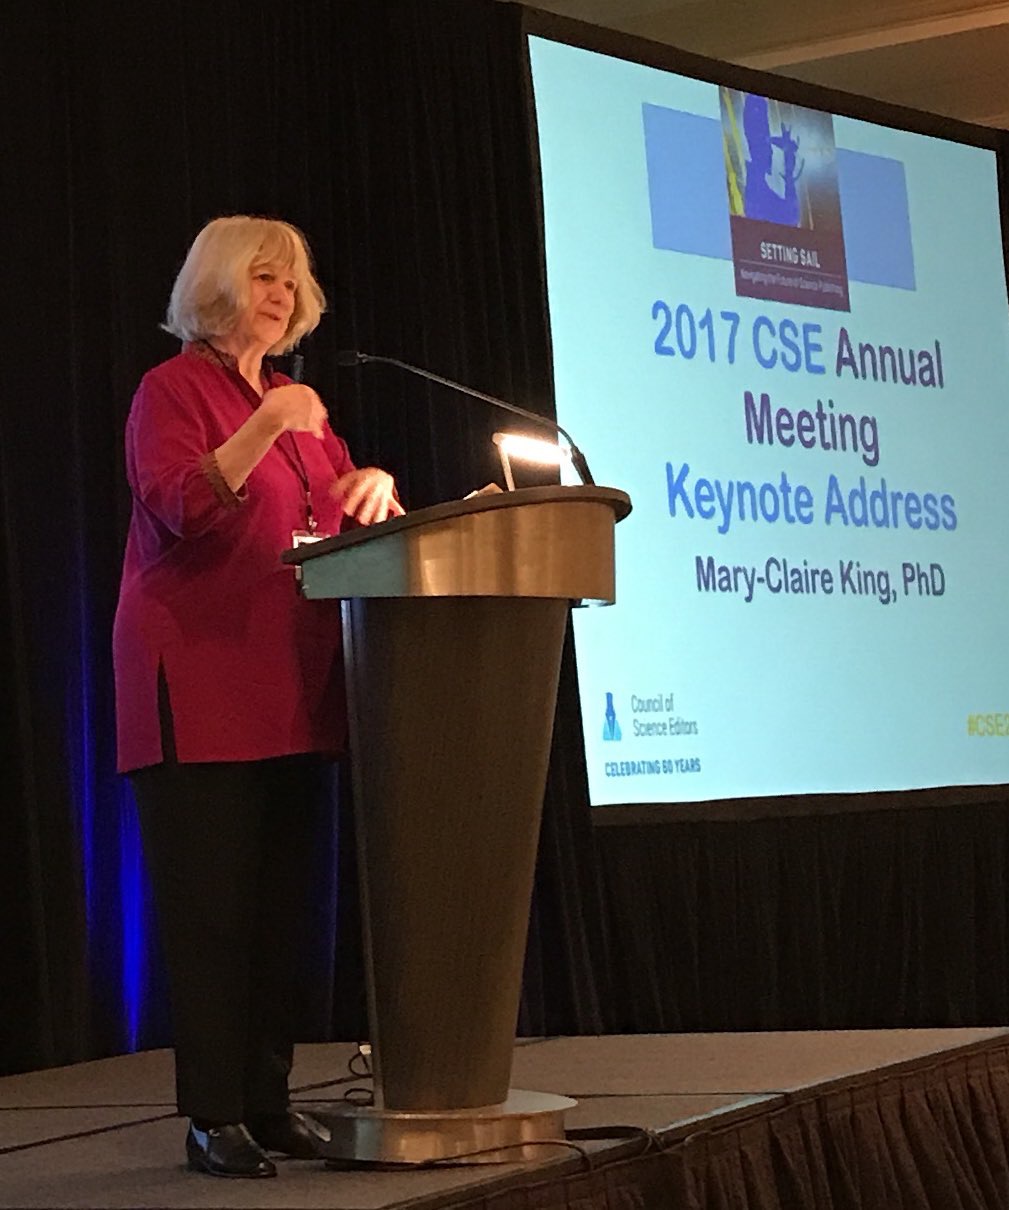 Mary-Claire King delivering the Keynote speech at CSE 2017